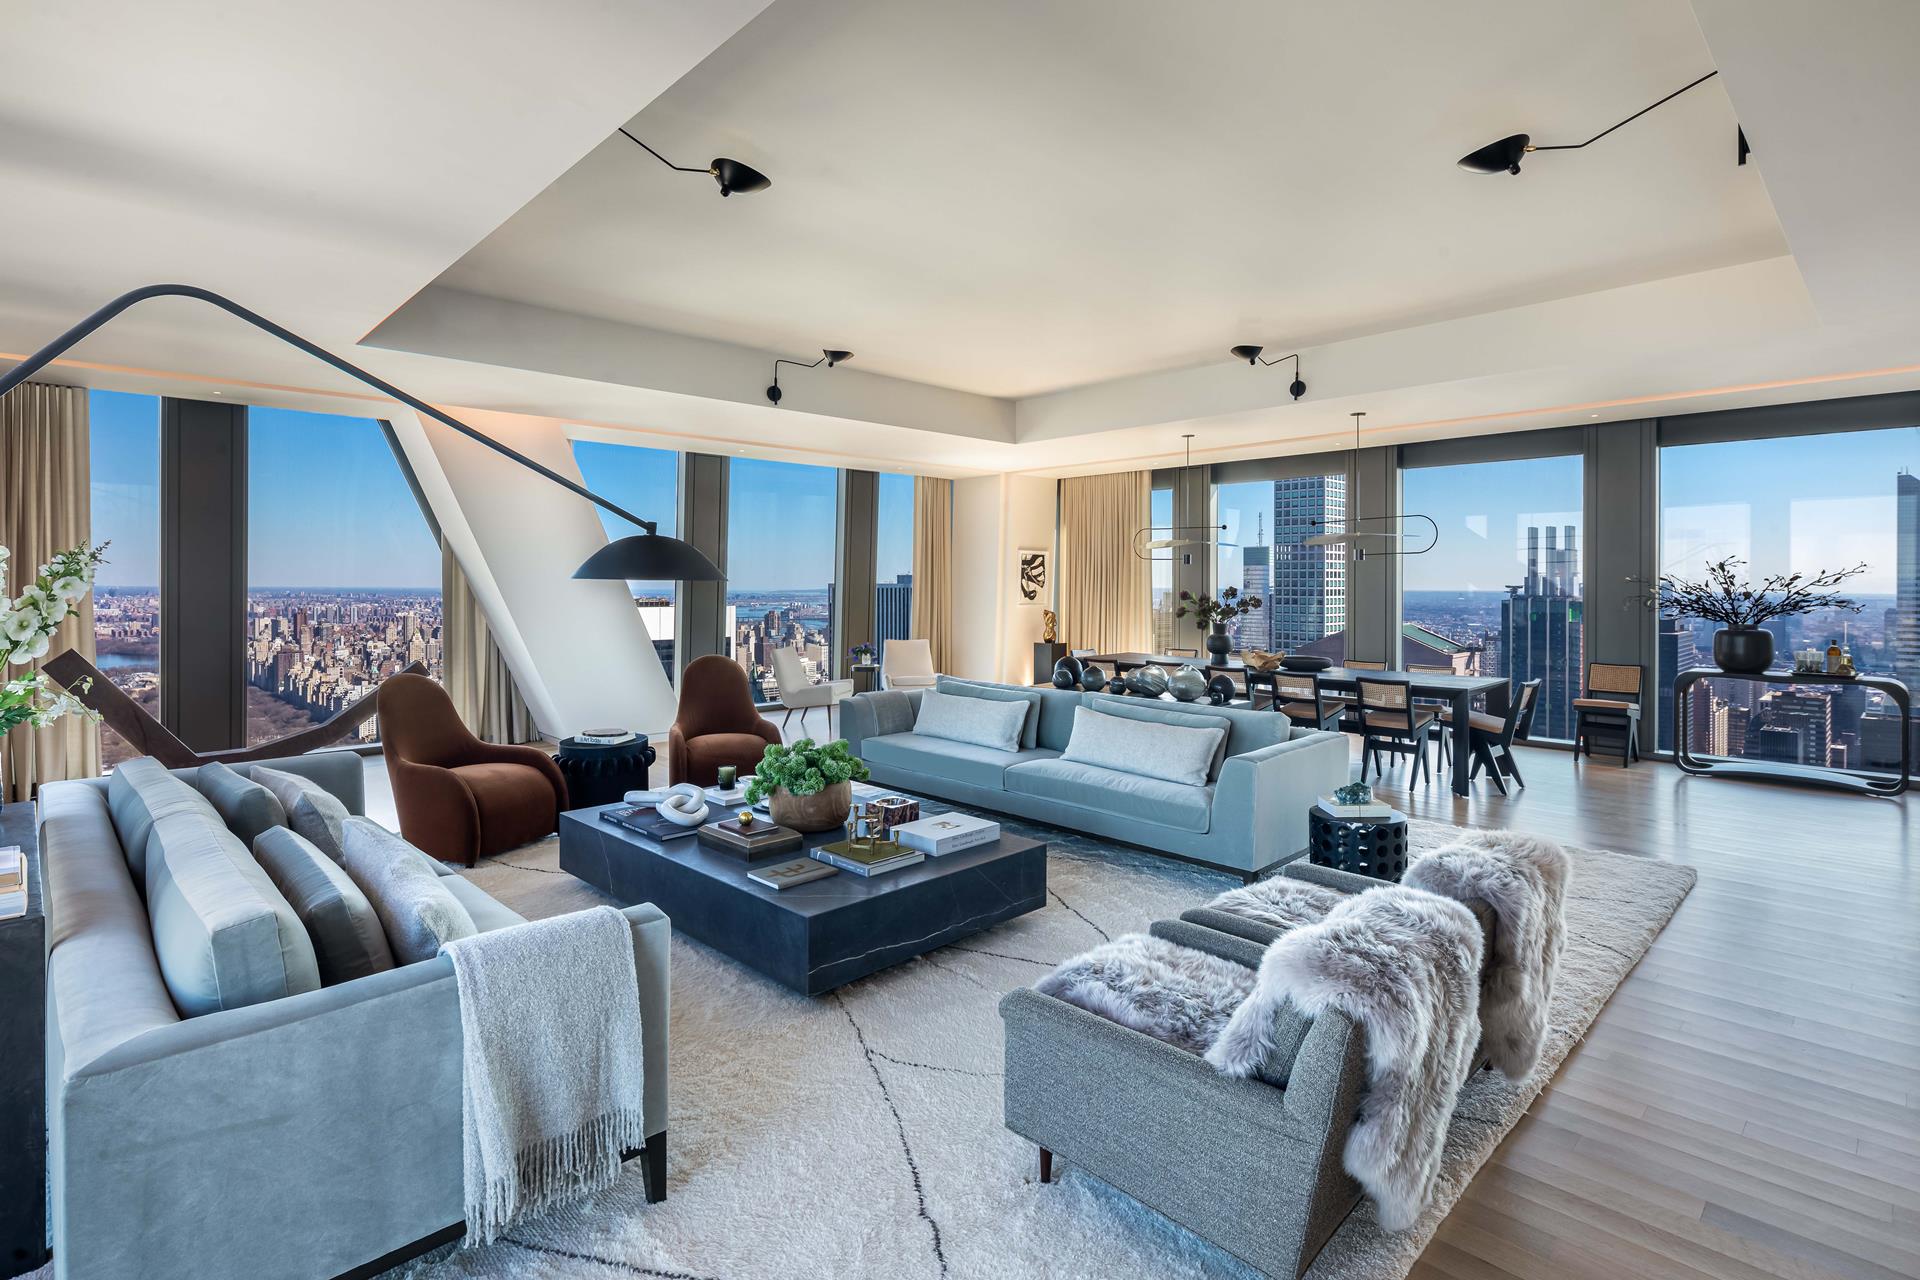 53 West 53rd Street 71, Chelsea And Clinton, Downtown, NYC - 3 Bedrooms  
4.5 Bathrooms  
5 Rooms - 